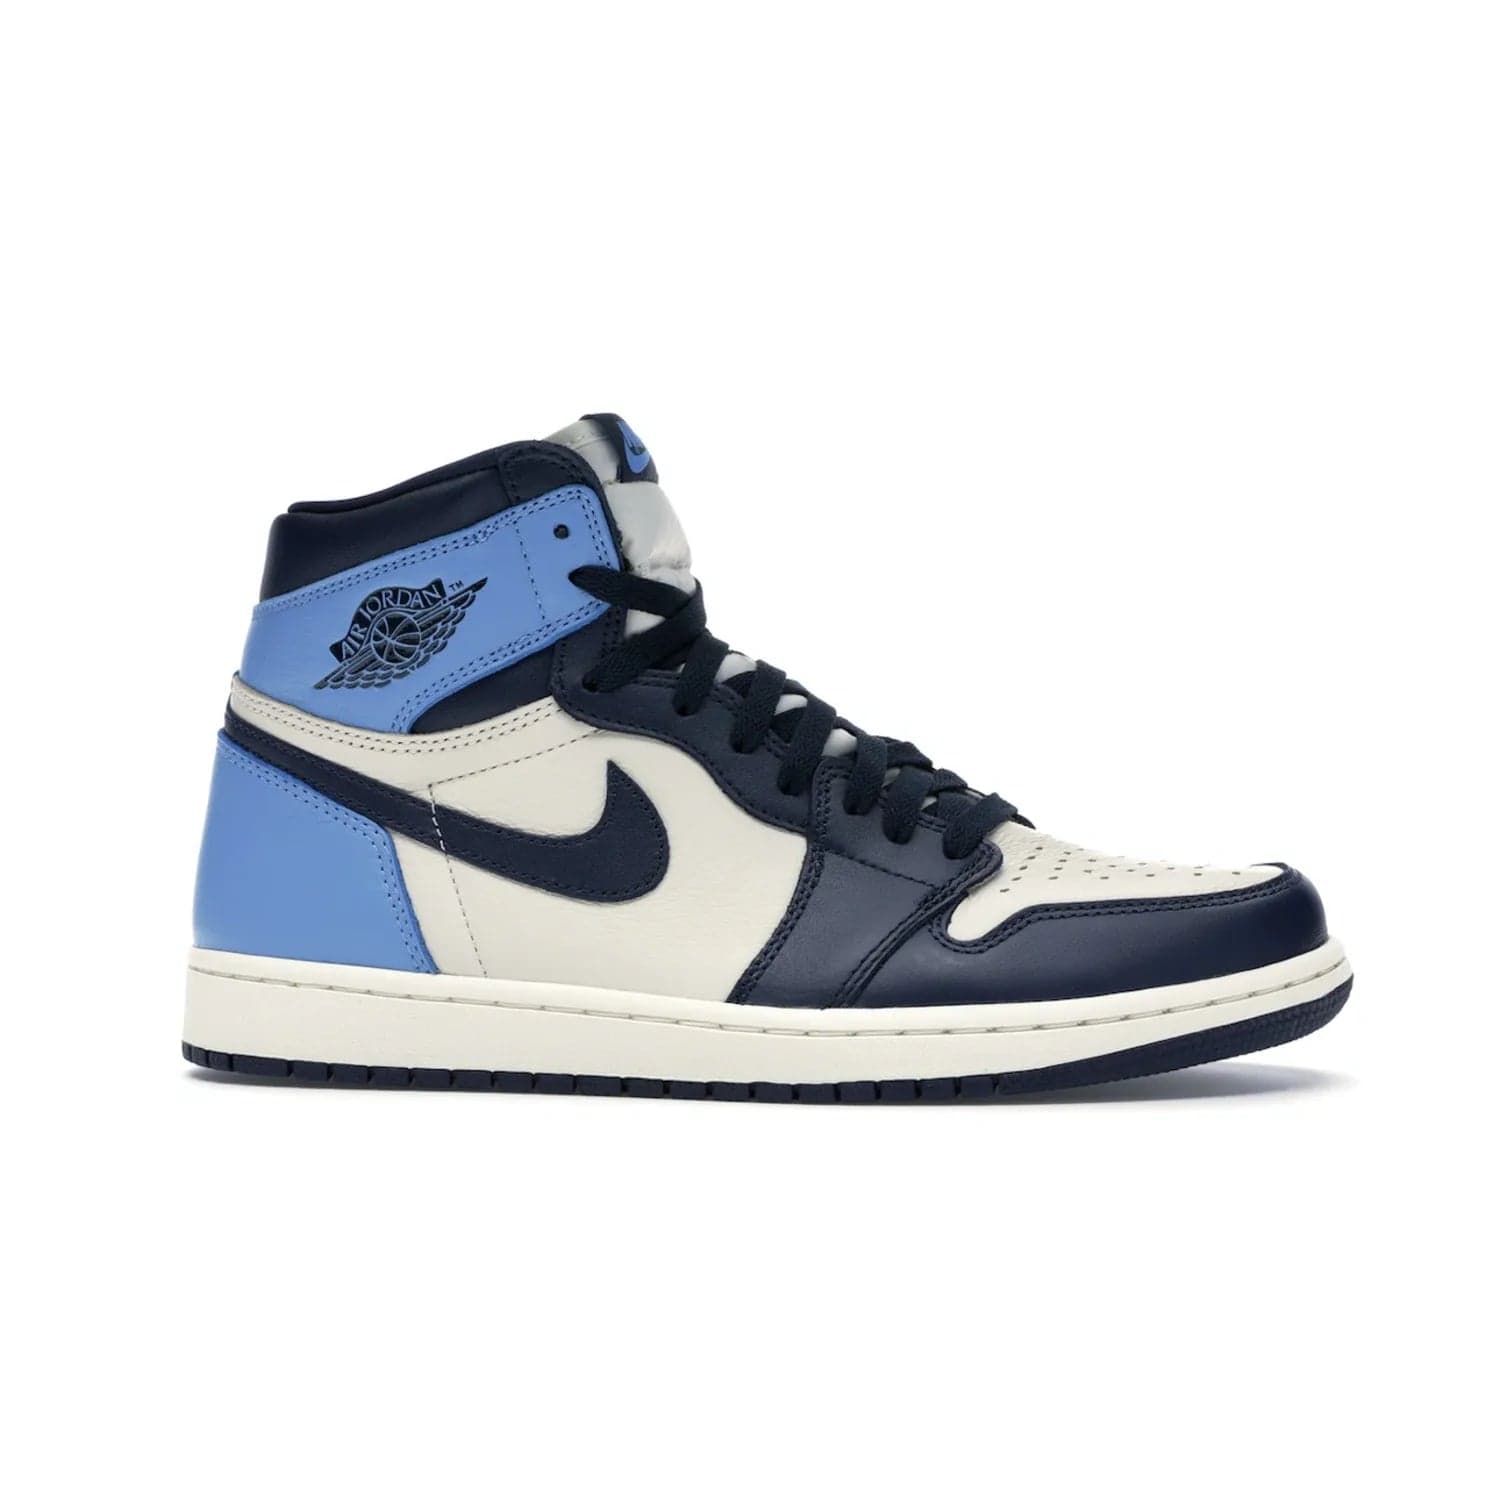 Jordan 1 Retro High Obsidian UNC - Image 2 - Only at www.BallersClubKickz.com - Bring a timeless classic to your wardrobe with the Air Jordan 1 Retro High "Obsidian/University Blue”. A full leather upper combines Obsidian and University Blue detailing for a retro Jordan style. Stitched Jumpman logo pays tribute to UNC. Experience classic style with a timeless sneaker.